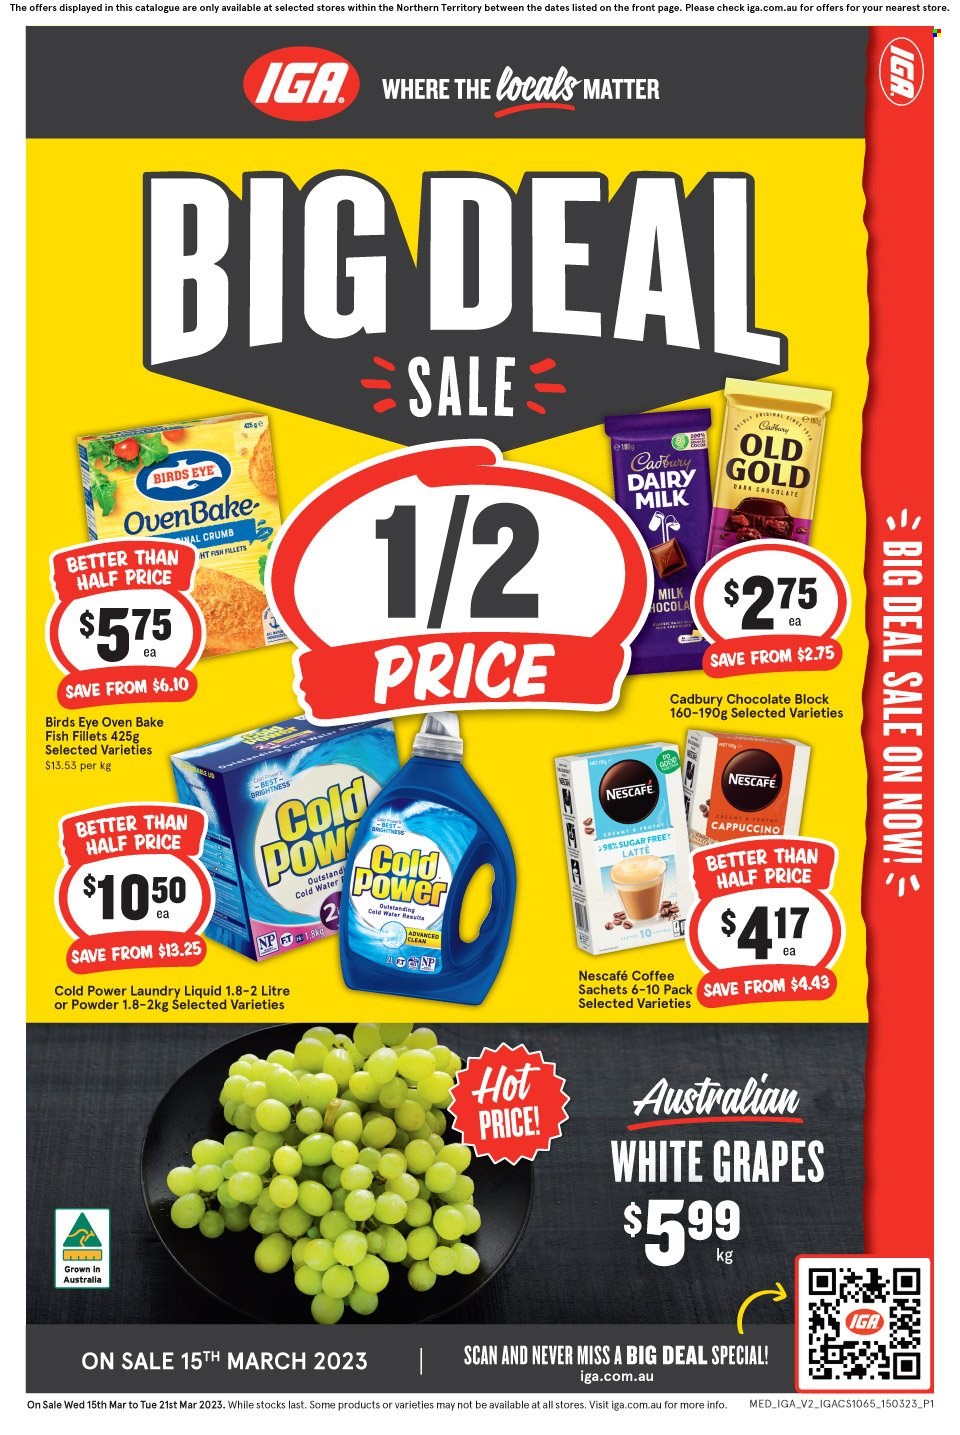 thumbnail - IGA Catalogue - 15 Mar 2023 - 21 Mar 2023 - Sales products - grapes, fish fillets, fish, Bird's Eye, chocolate, Cadbury, Dairy Milk, water, cappuccino, coffee, Nescafé, laundry detergent. Page 1.